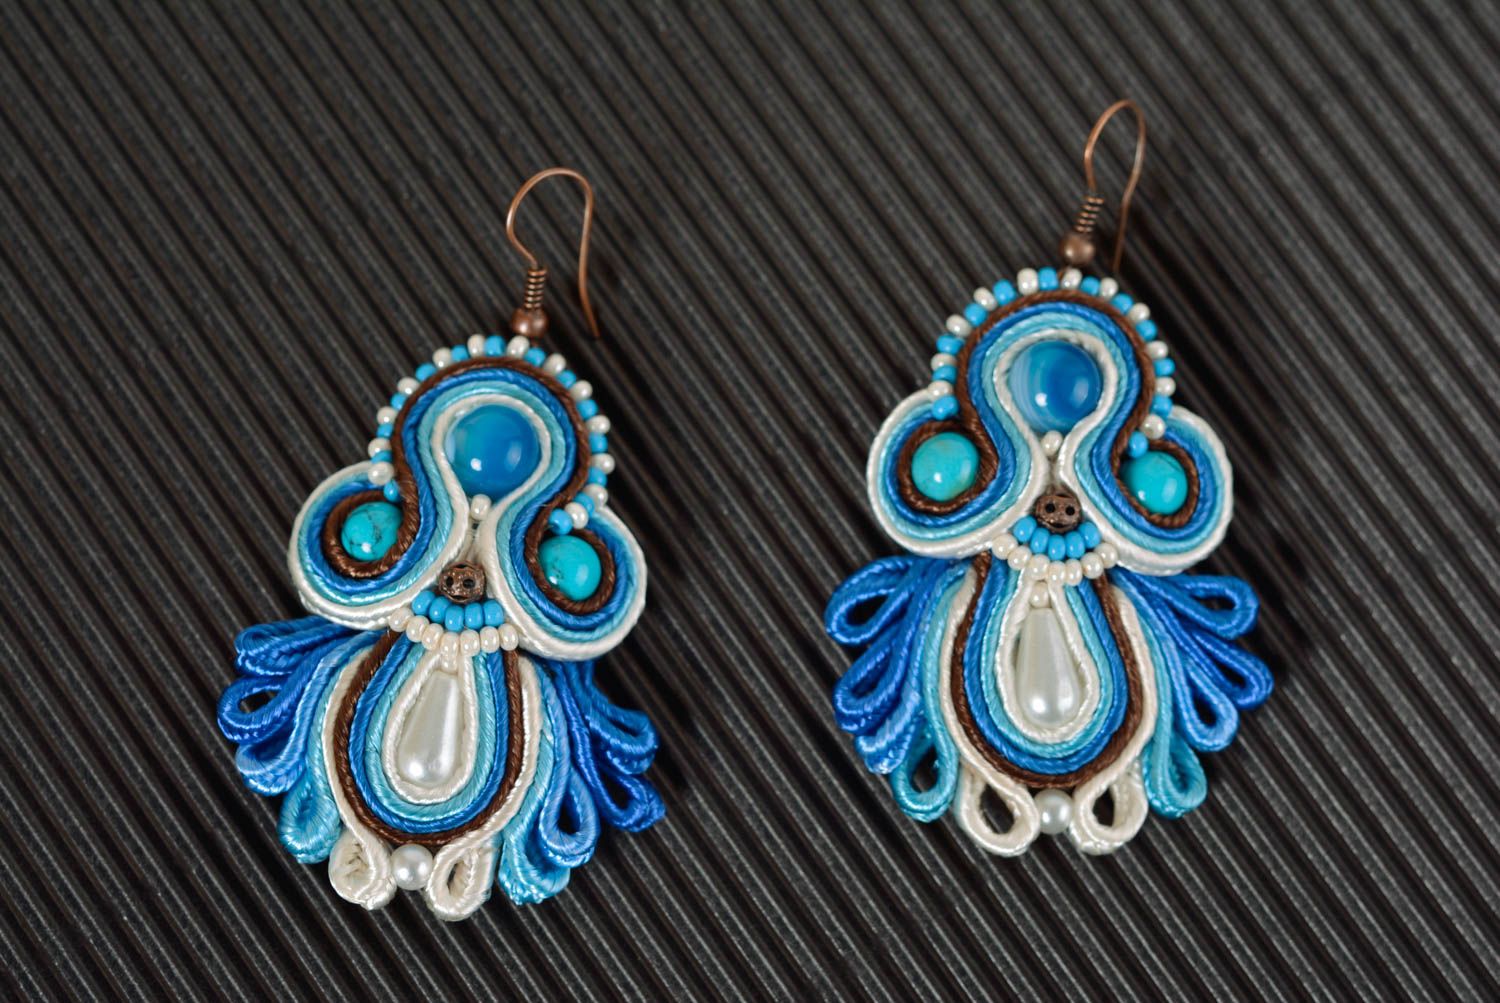 Handmade soutache jewelry soutache pendant and earrings accessories with stones photo 4